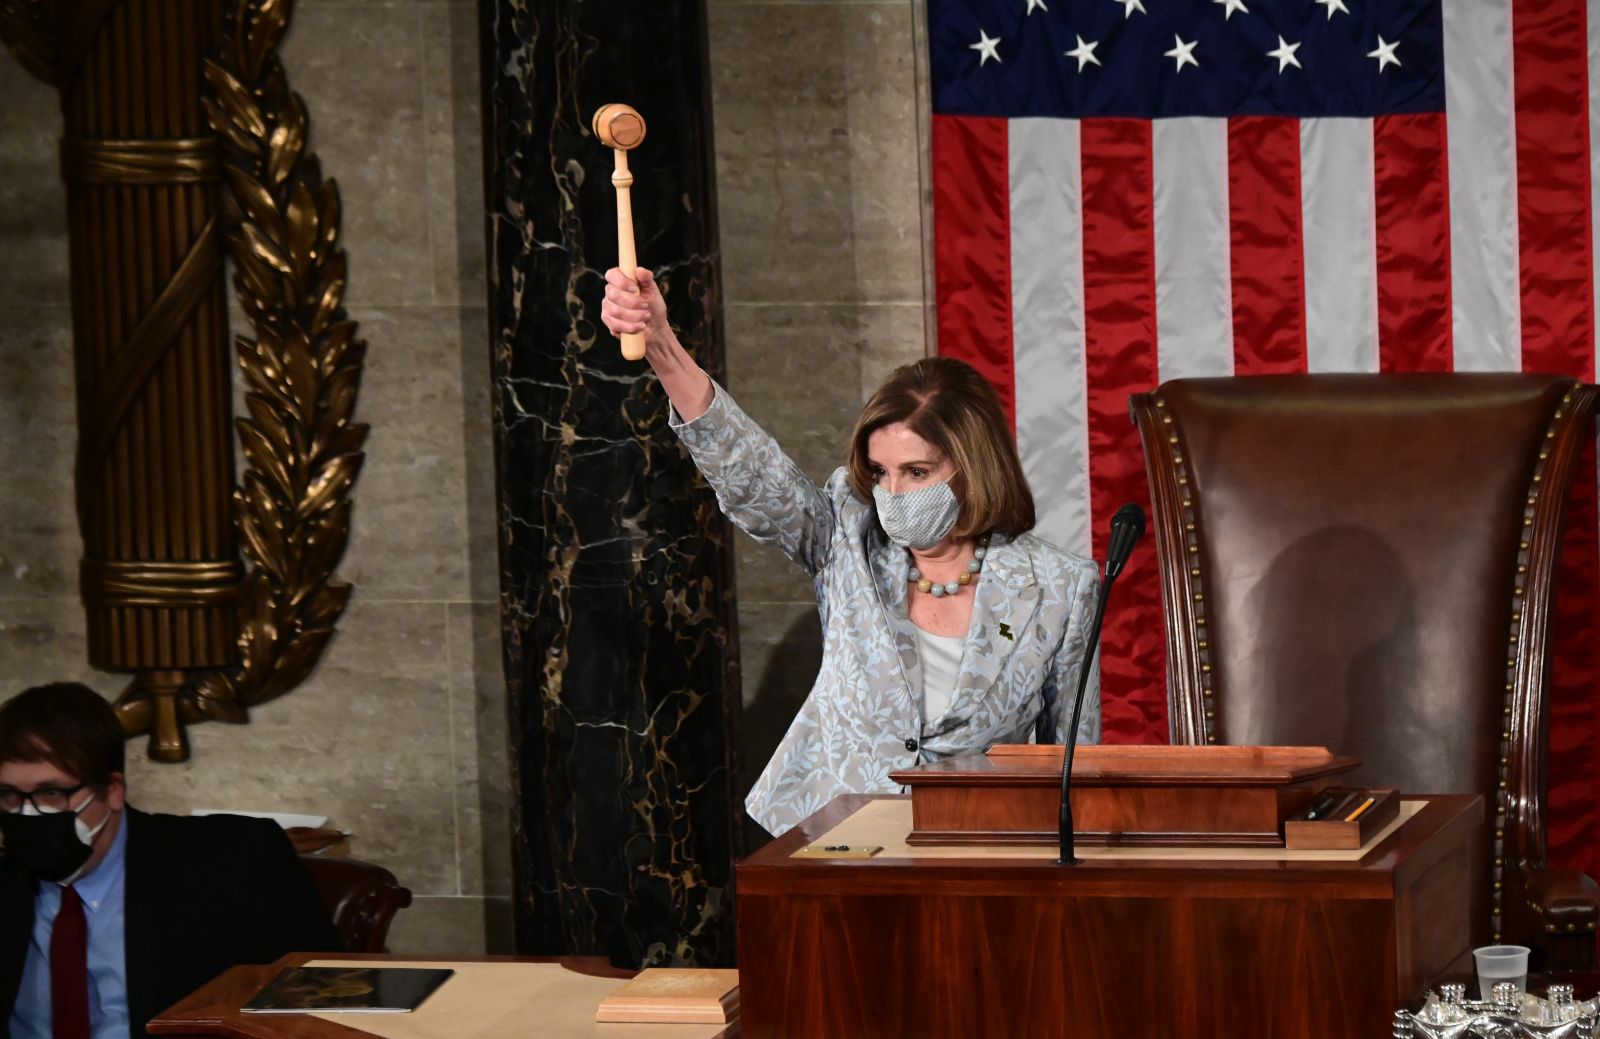 epa08917854 US Speaker of the House Nancy Pelosi wields the Speaker's gavel after being re-elected as Speaker and preparing to swear in members of the 117th House of Representatives in Washington, USA, 03 January 2021.  EPA/ERIN SCOTT / POOL